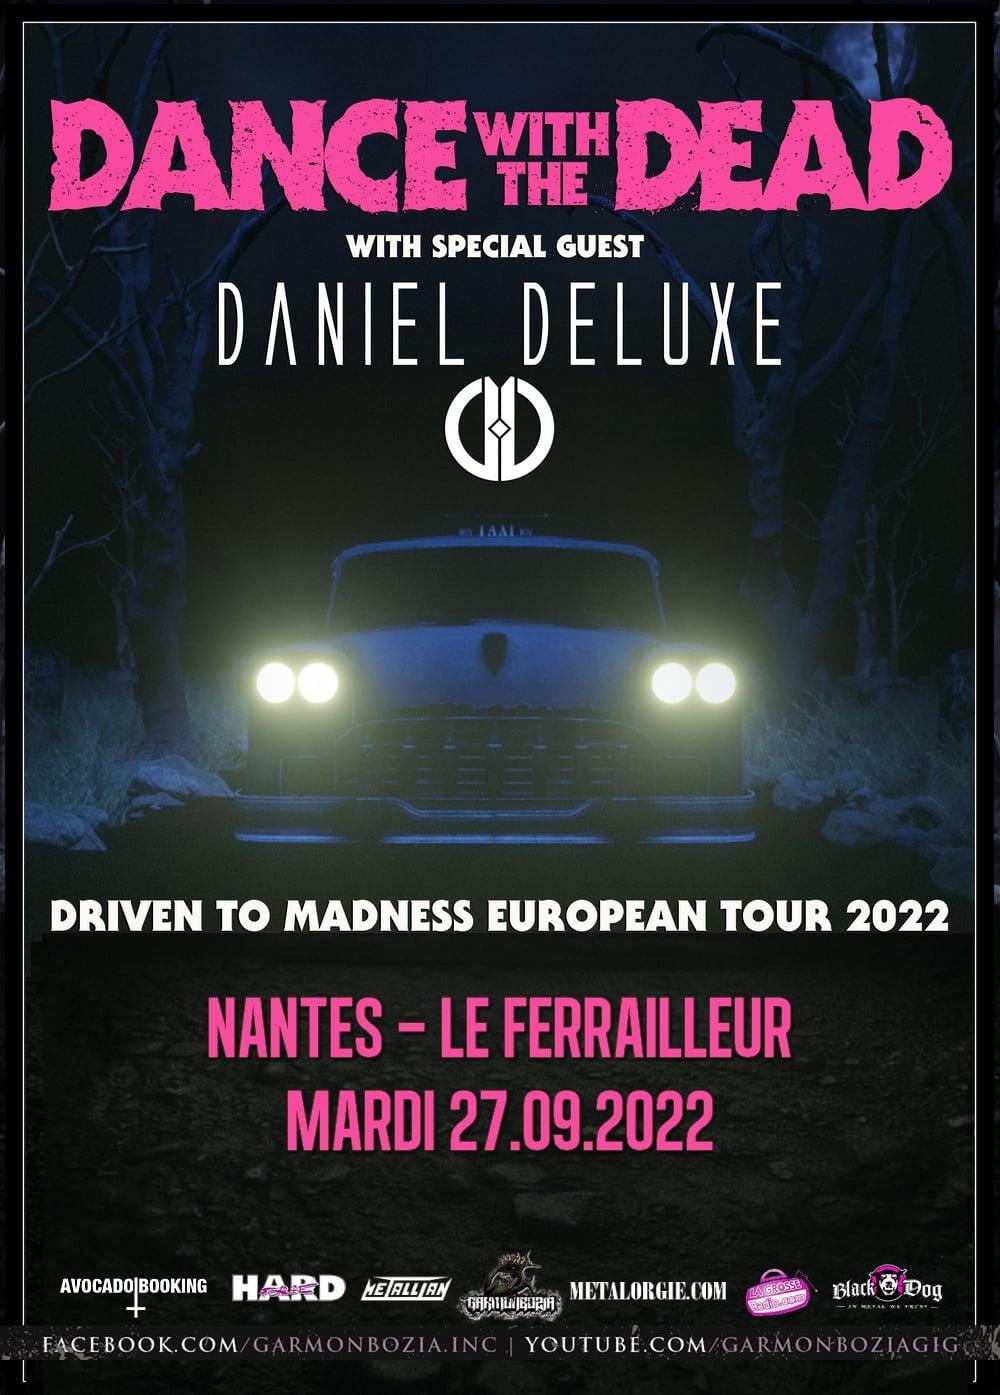 Dance with the dead nantes 2022